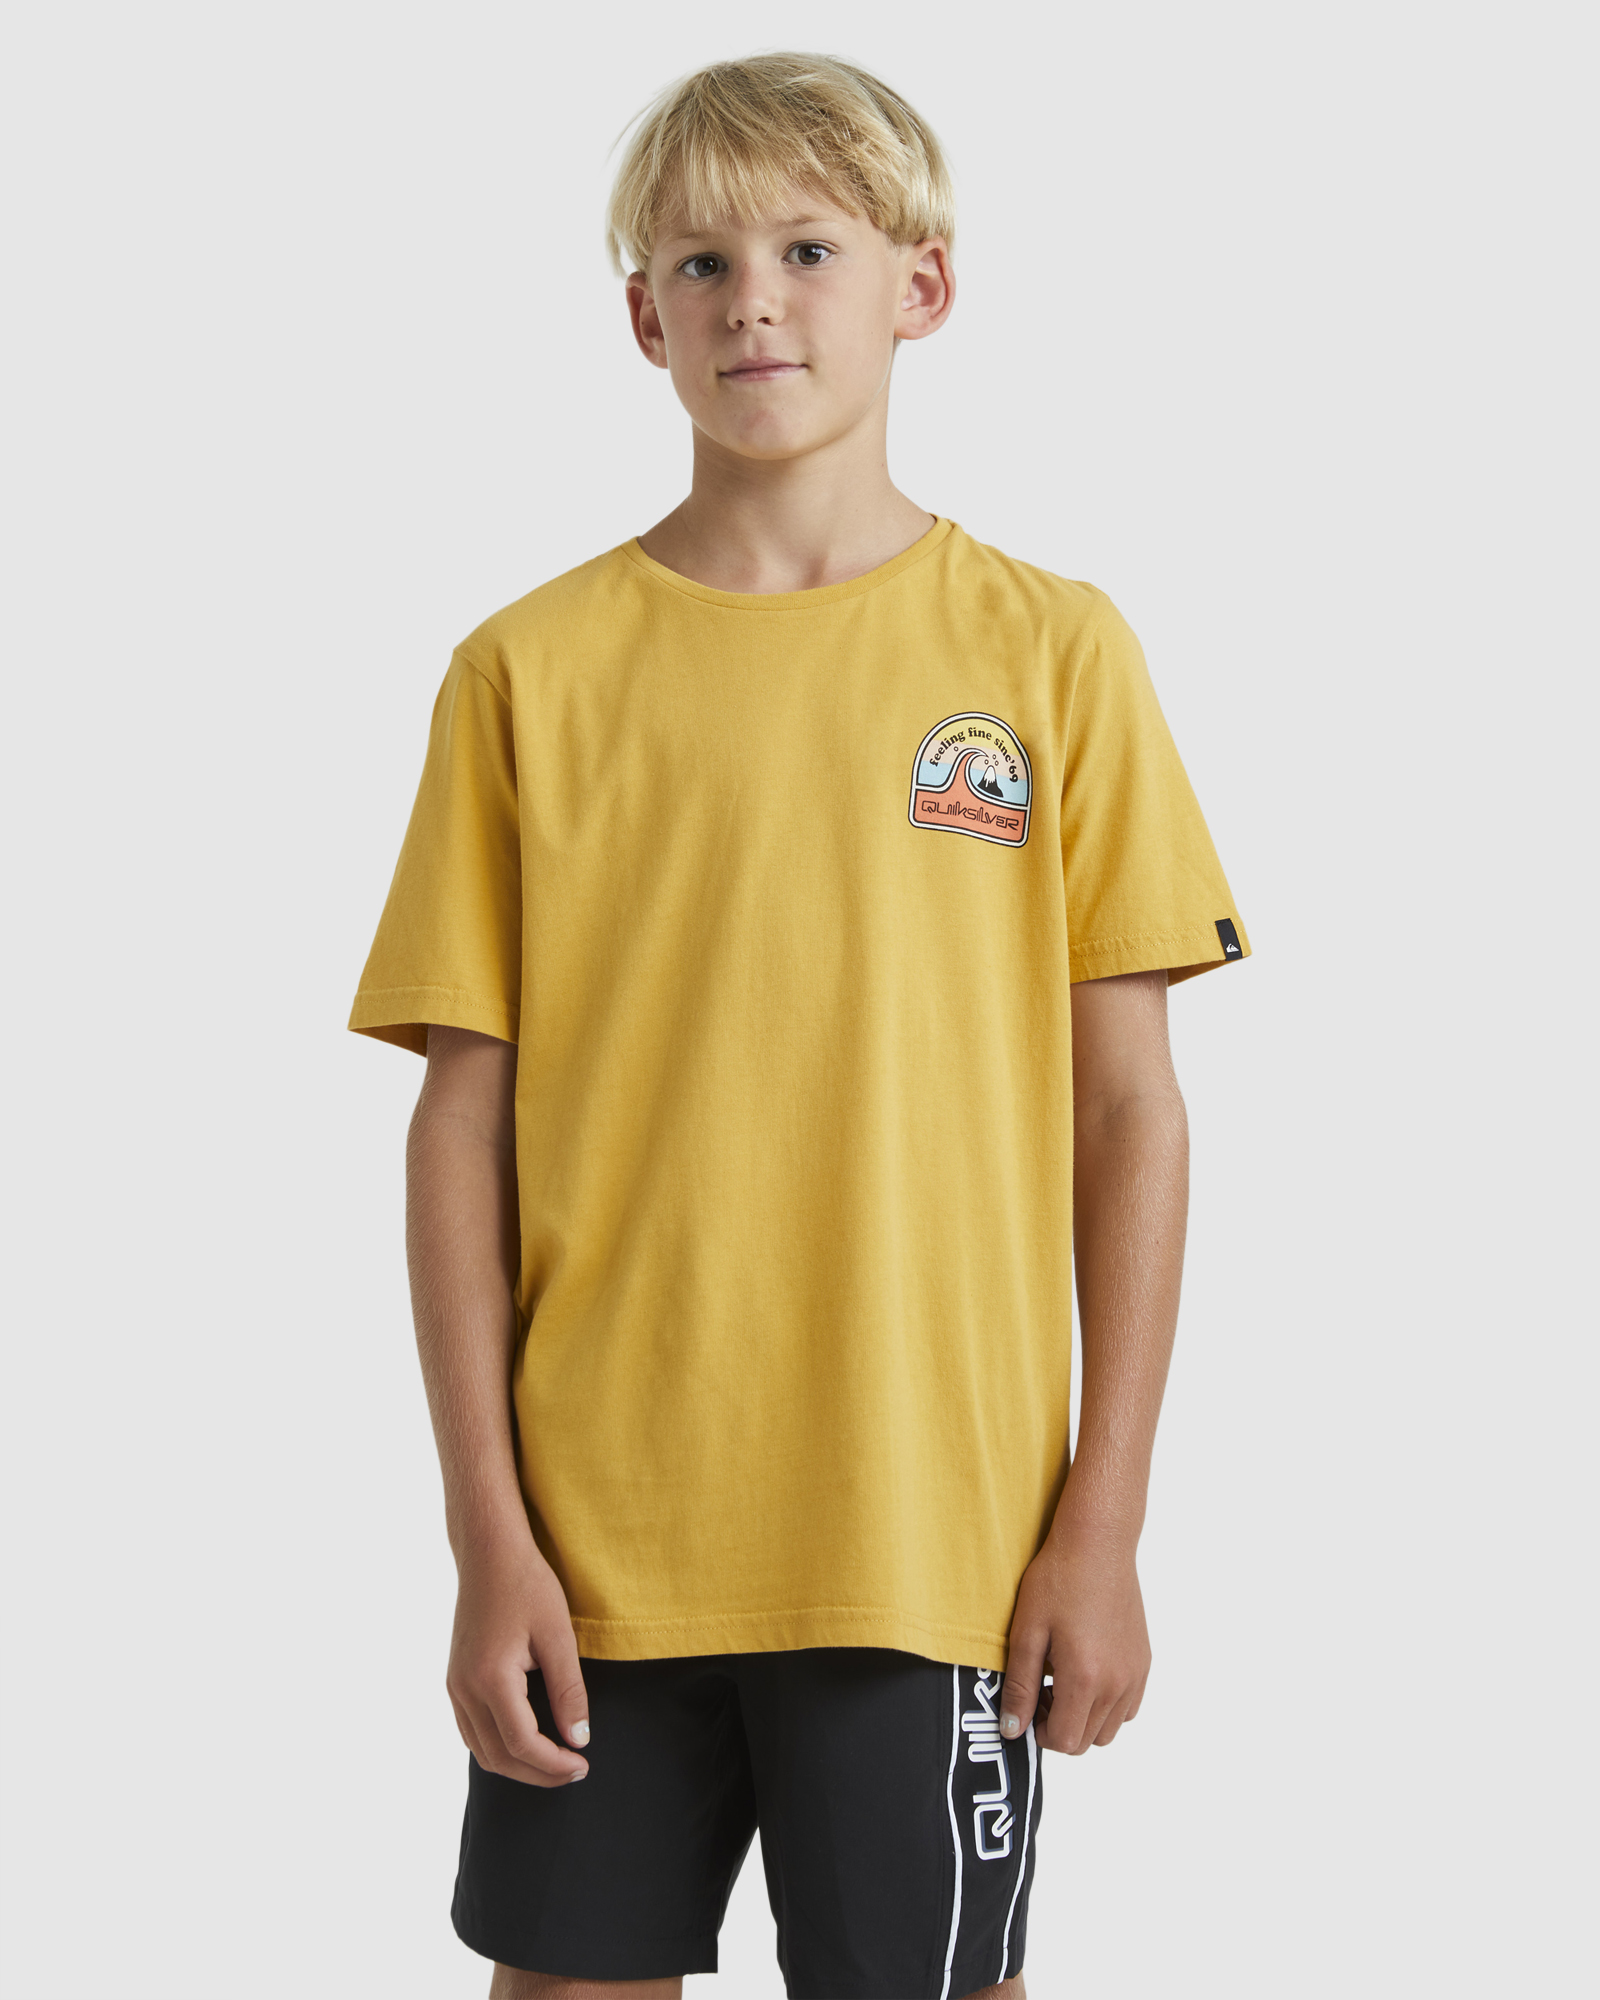 Quiksilver Boys 8-16 In The Groove Tee - Mustard | SurfStitch